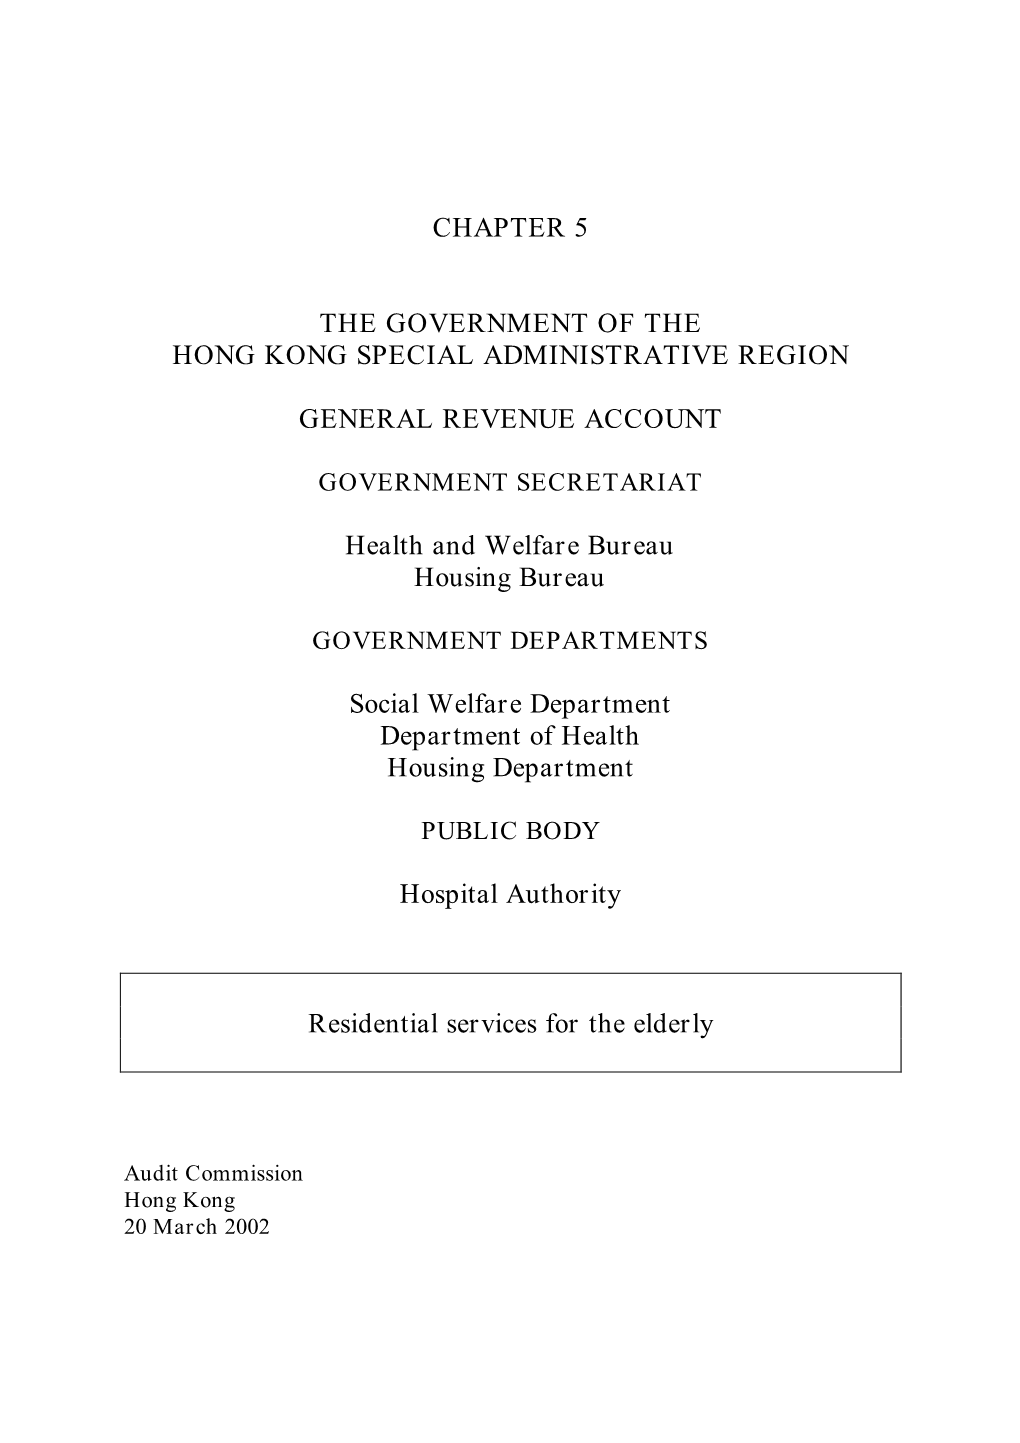 CHAPTER 5 the GOVERNMENT of the HONG KONG SPECIAL ADMINISTRATIVE REGION GENERAL REVENUE ACCOUNT Health and Welfare Bureau Housin